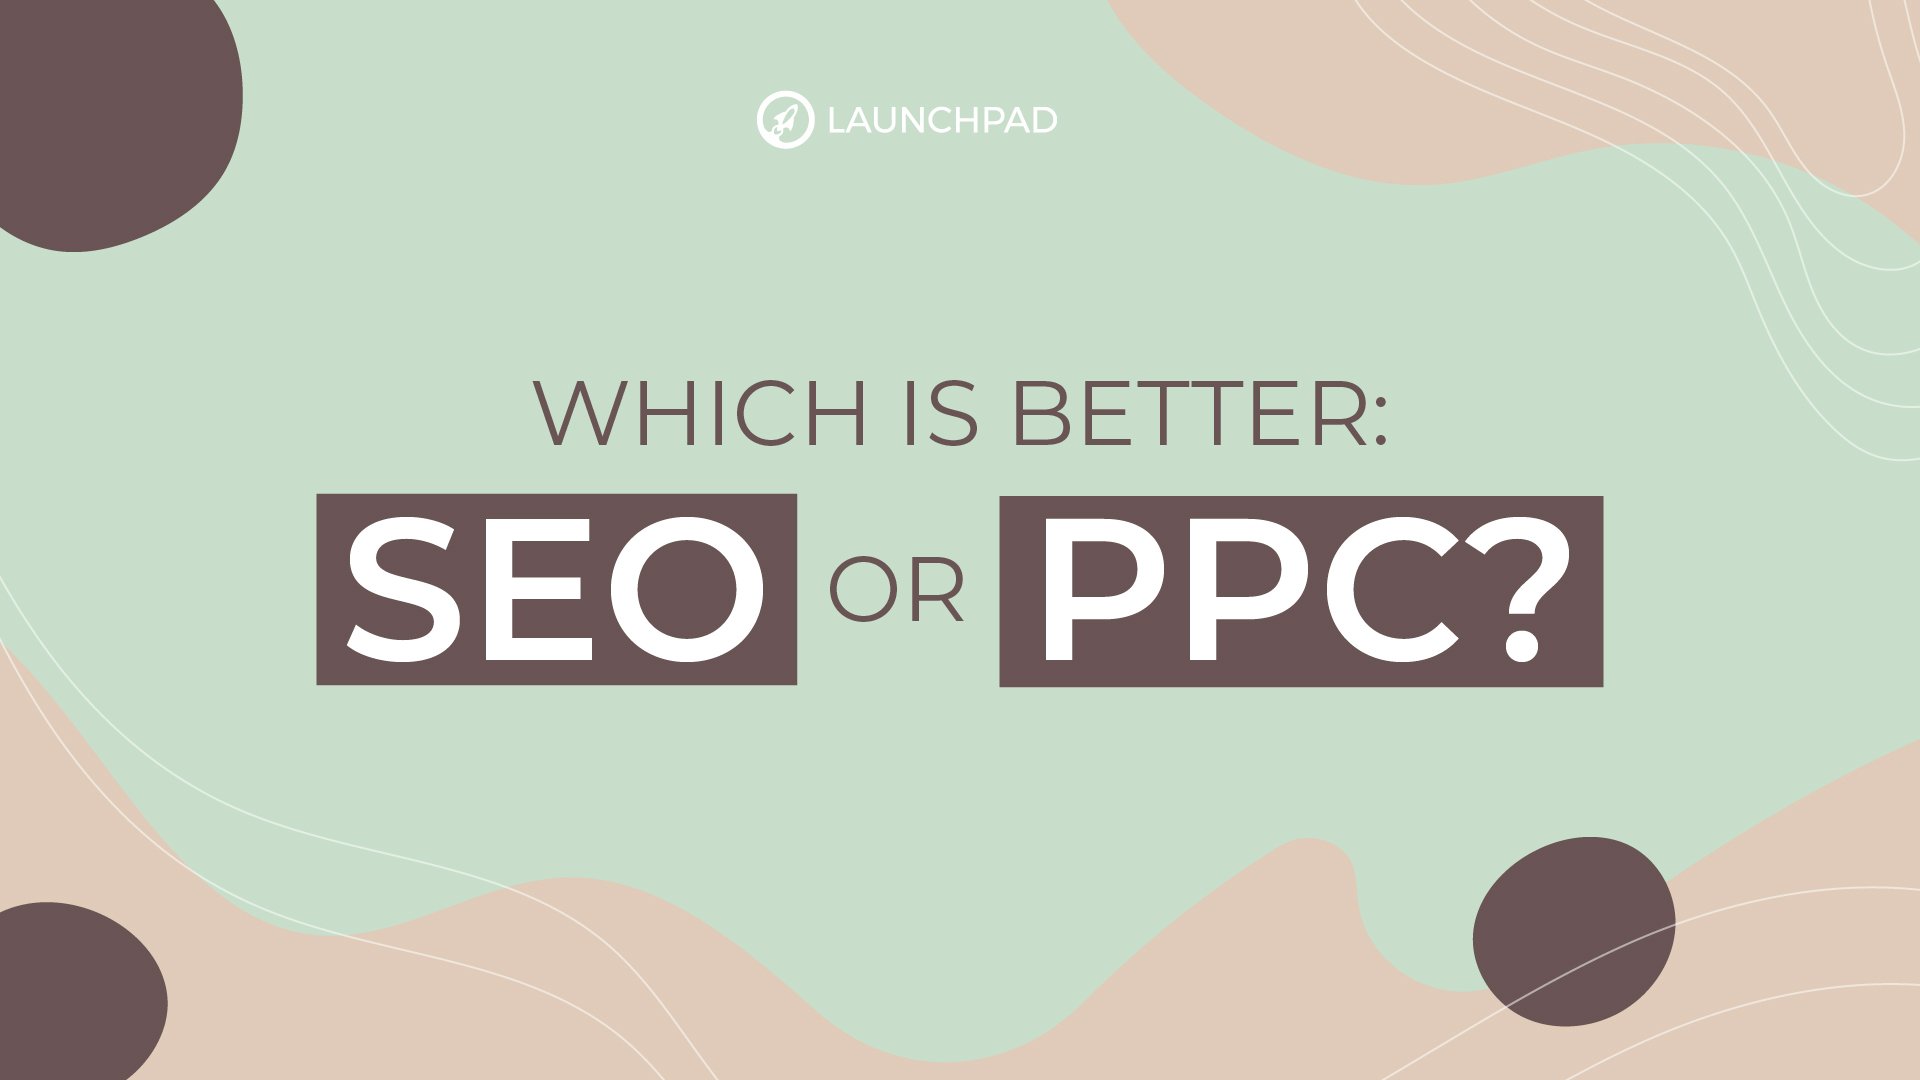 Which is better: SEO or PPC